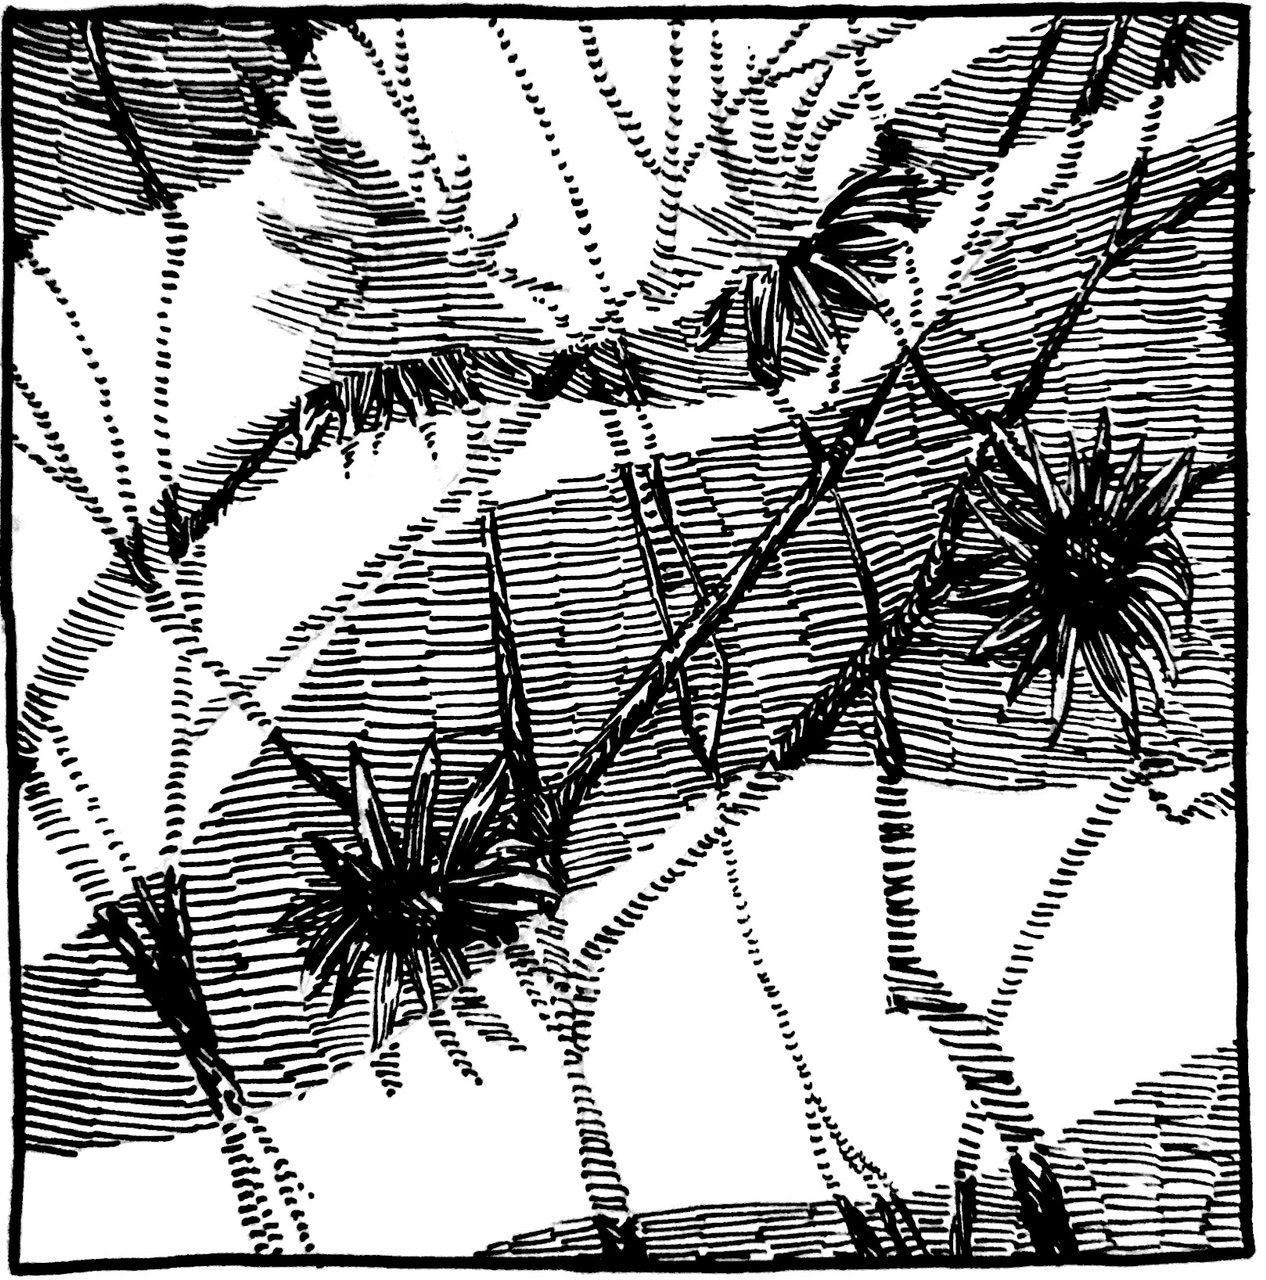 A square pen-and-ink crosshatching illustration of thistle plants on a grey background with a thick wavy semi-translucent white lines overlaid on the image.